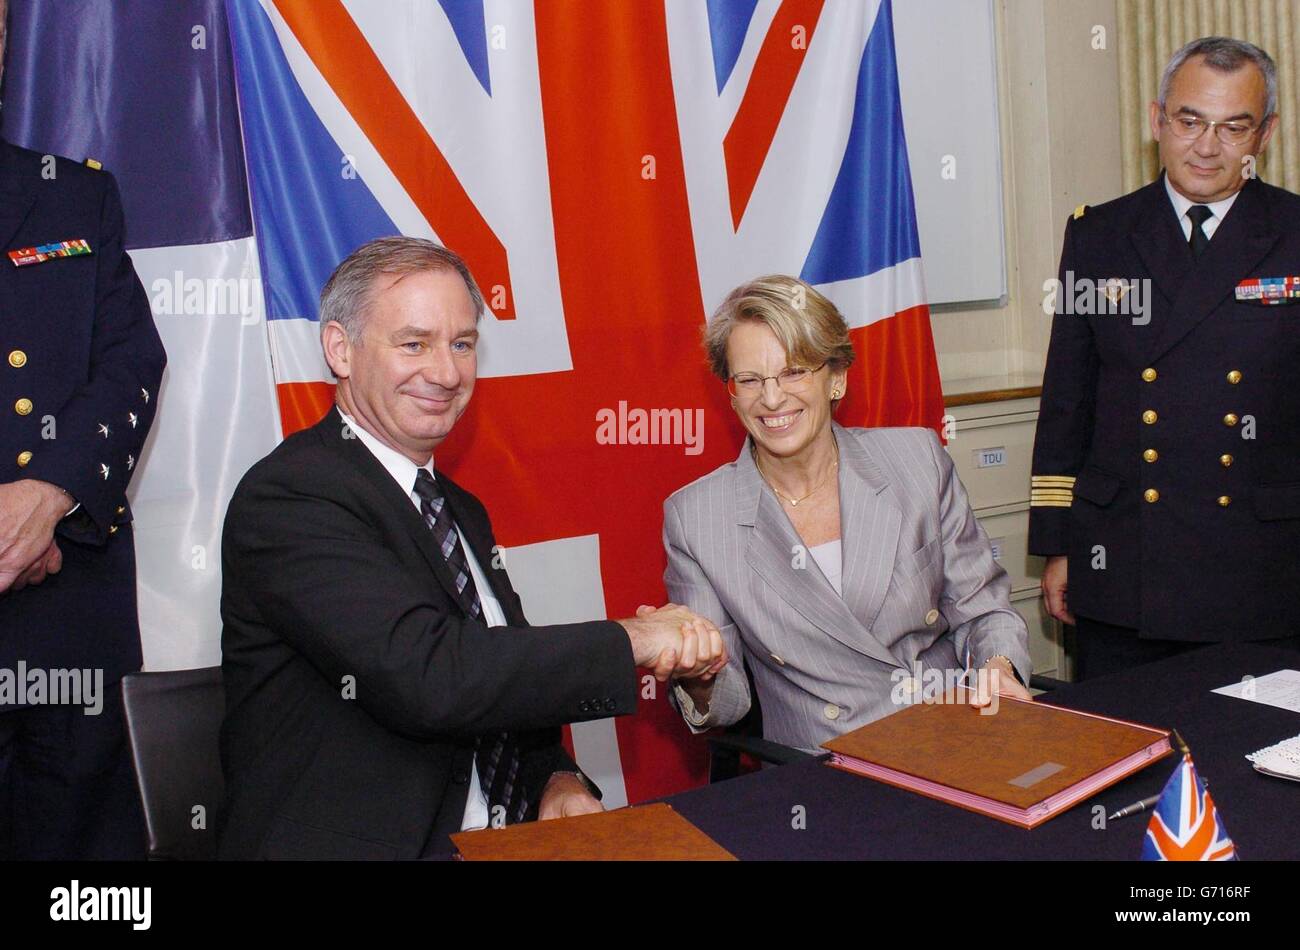 Politics Military Flags Shaking Hands Smiling Sitting Geoff Hoon High ...